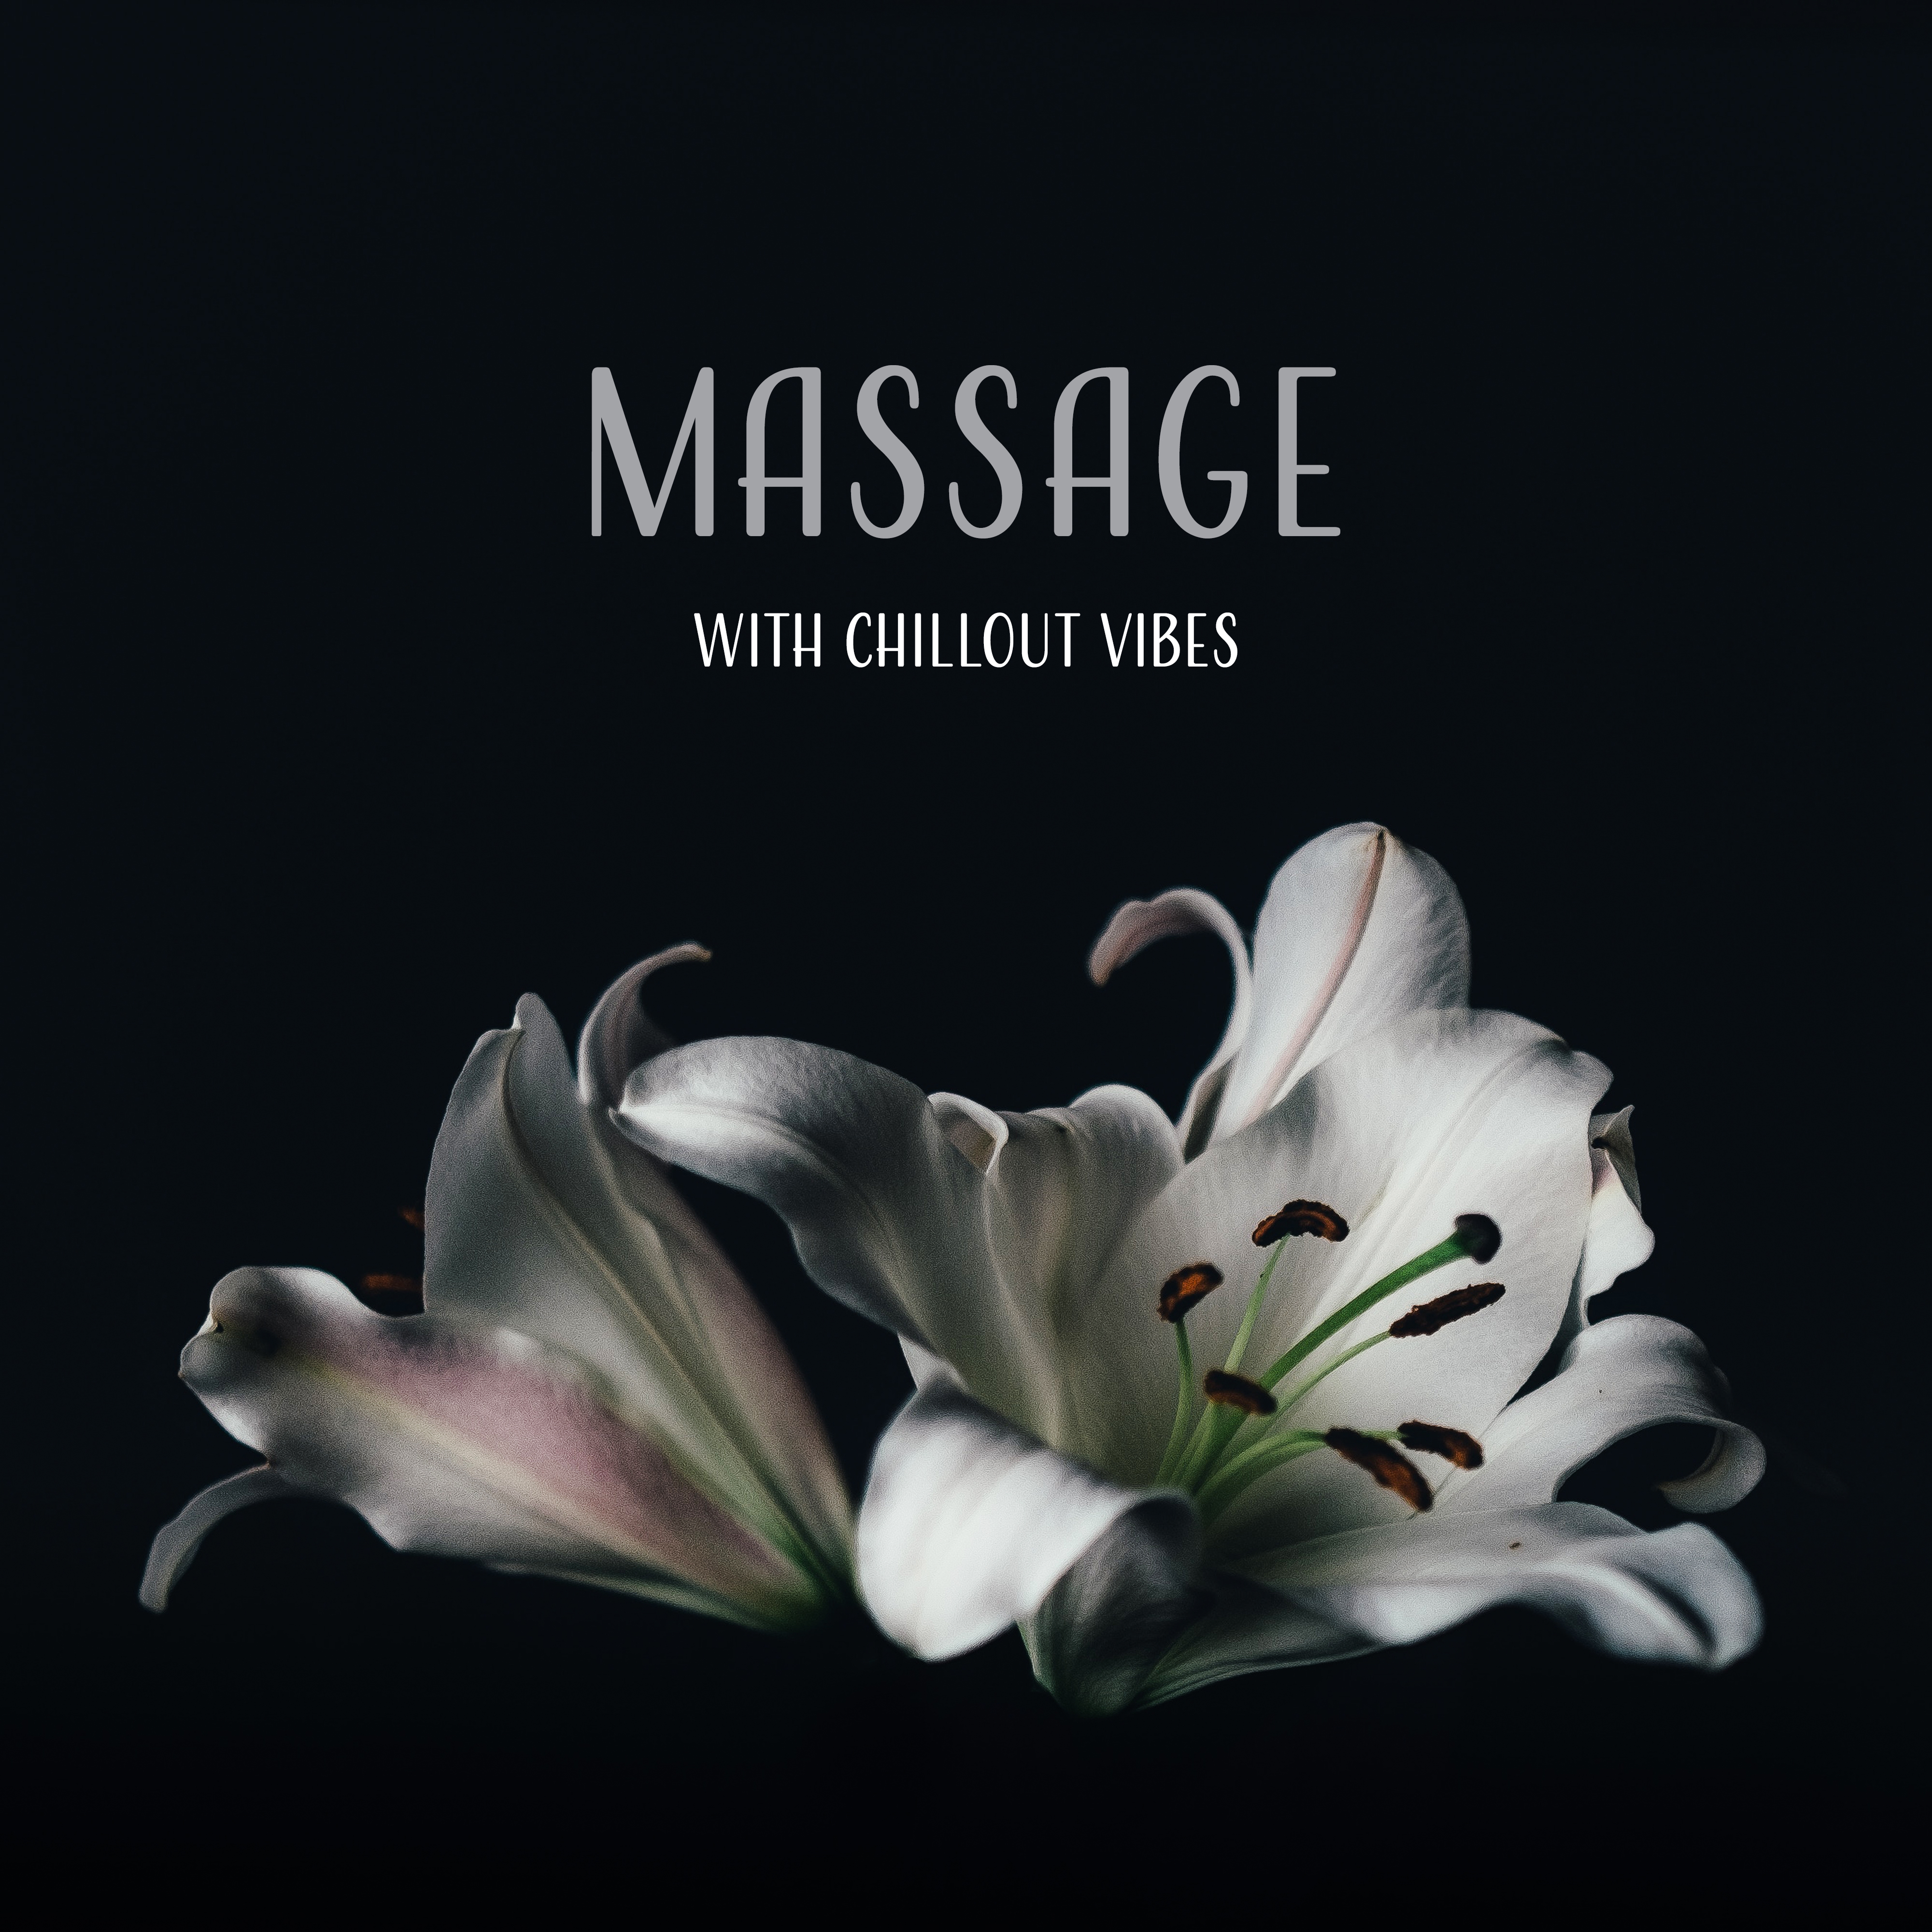 Massage with Chillout Vibes – Chill Out 2017, Music for Massage, Spa, Relaxation, Sensual Vibrations